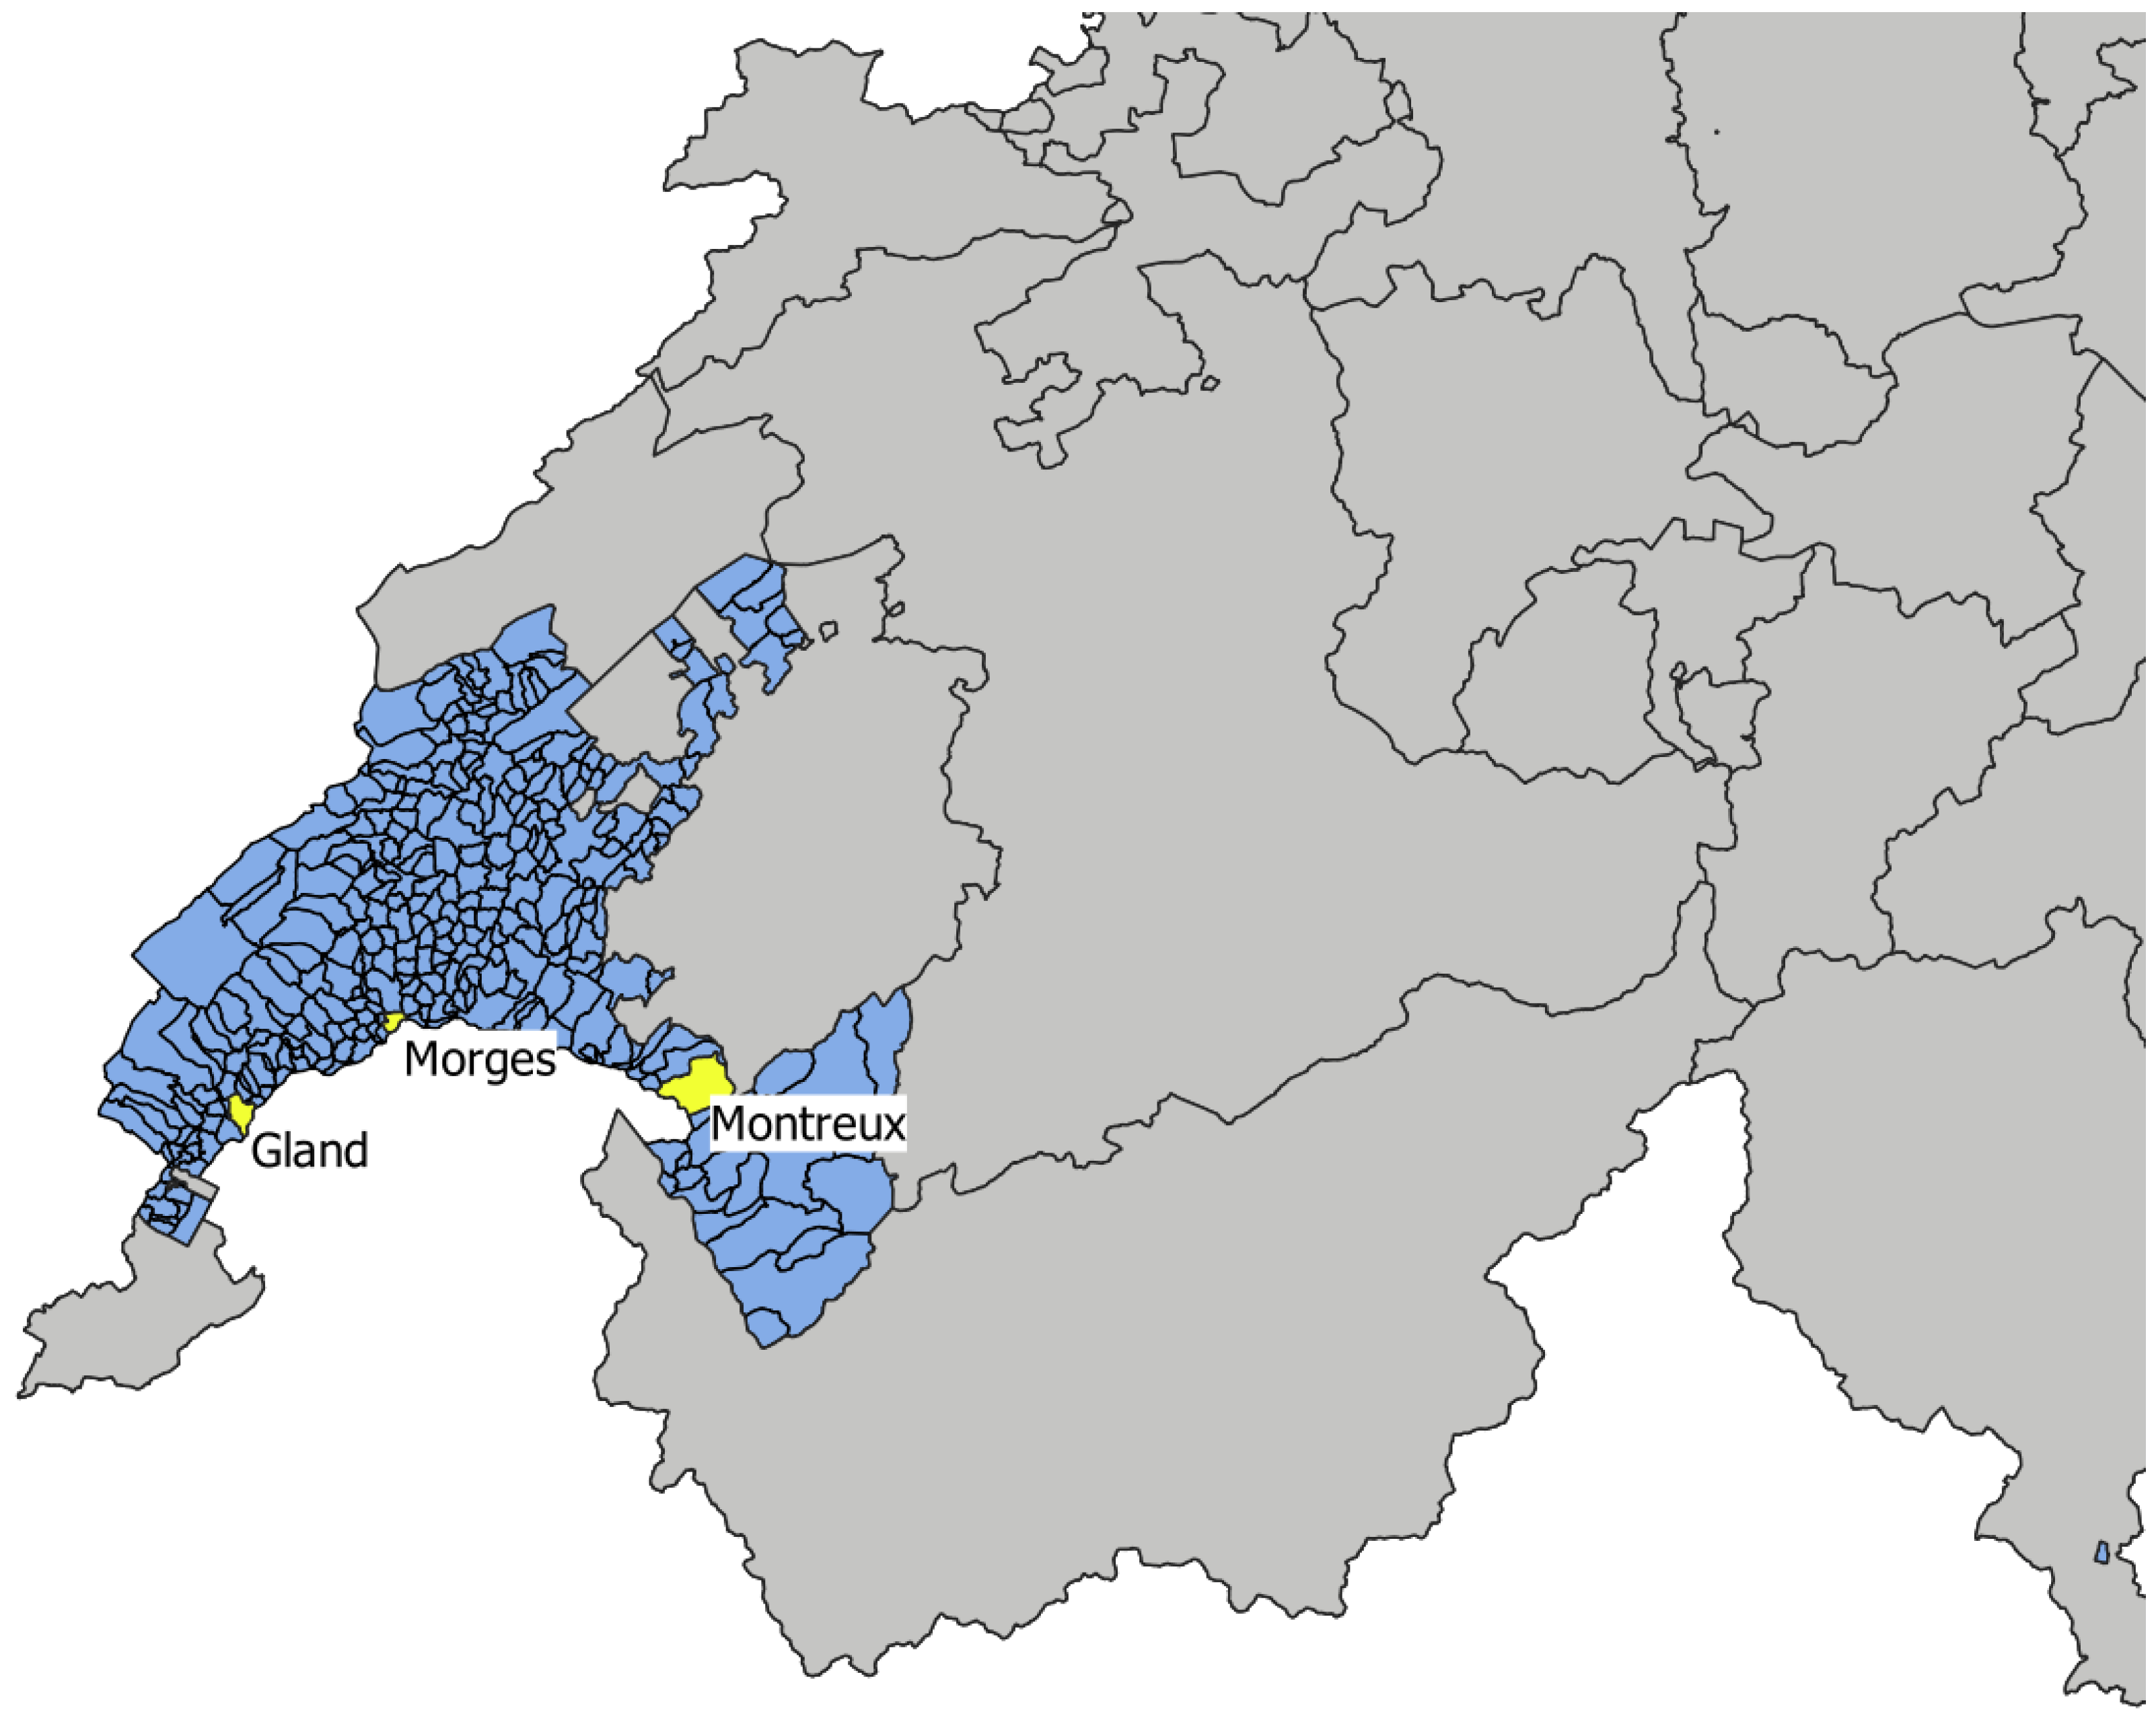 Sustainability | Free Full-Text | Implementation of Local Energy Plans in Western  Switzerland: Survey of the Current State and Possible Paths Forward